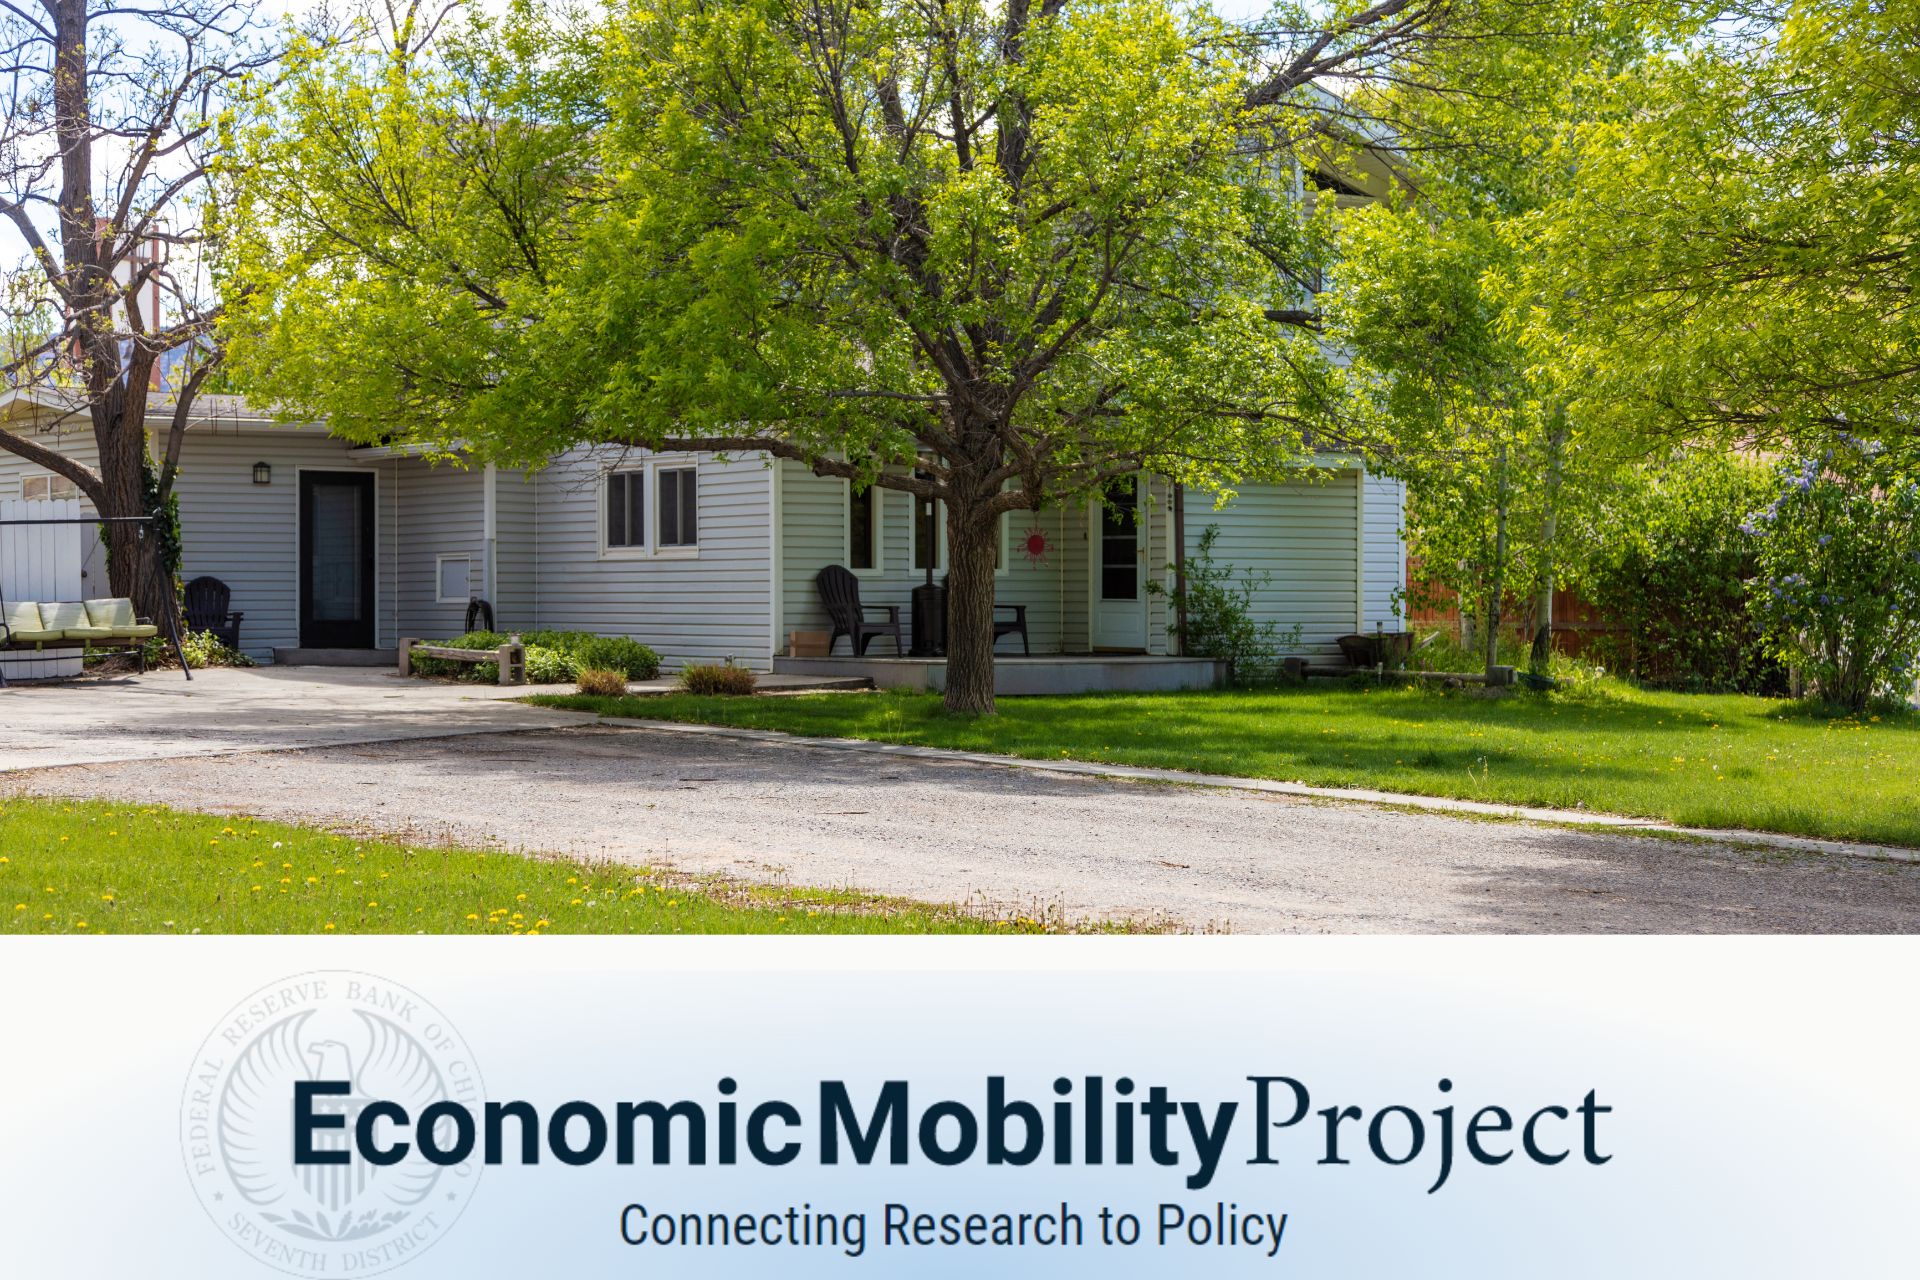 Economic Mobility Project - A single-family home on a tree-lined street in daylight